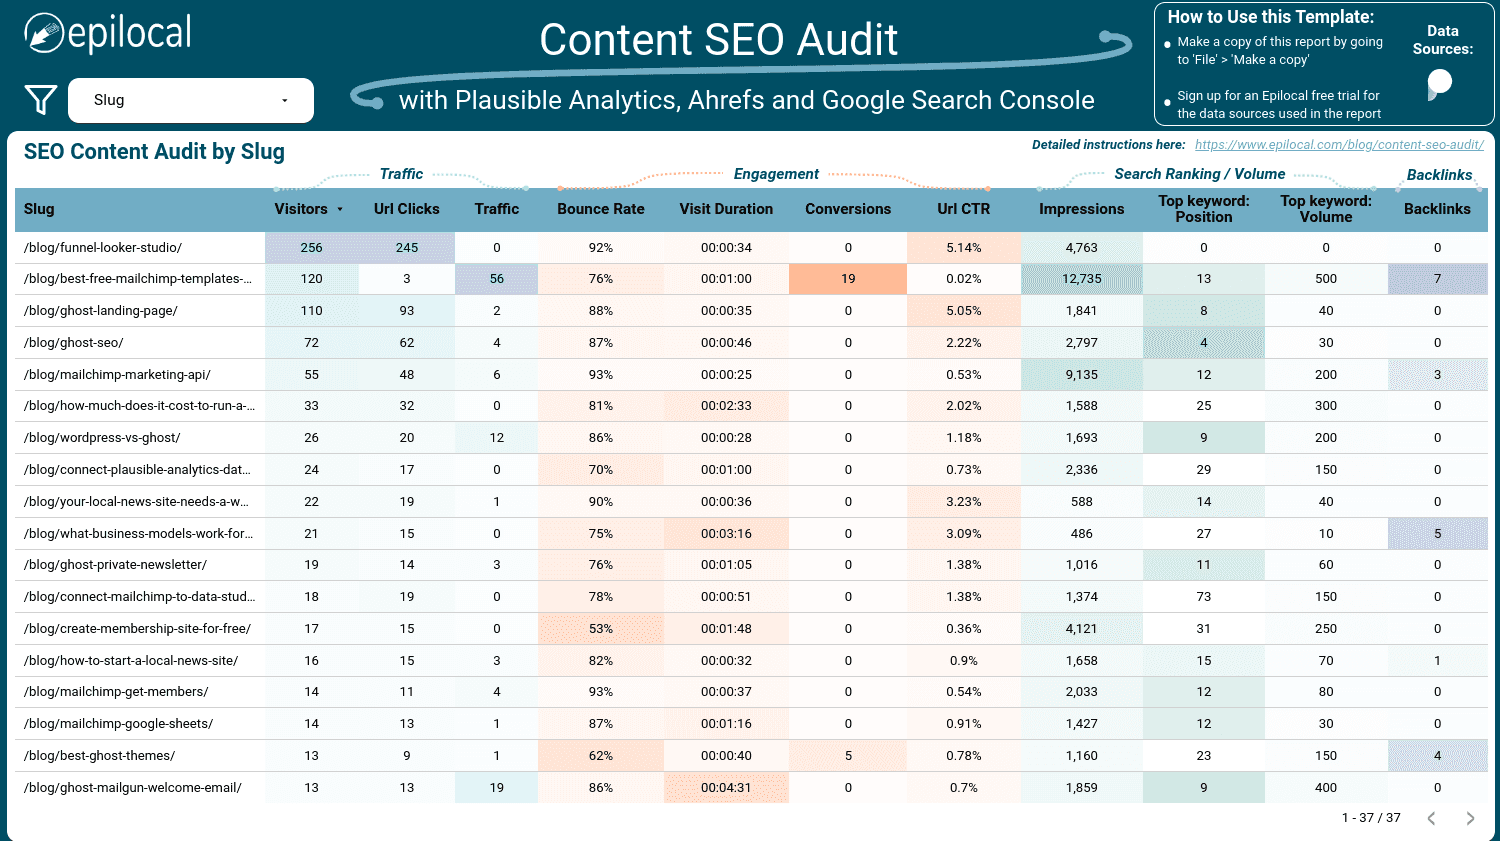 Content SEO Audit Template with Plausible Analytics